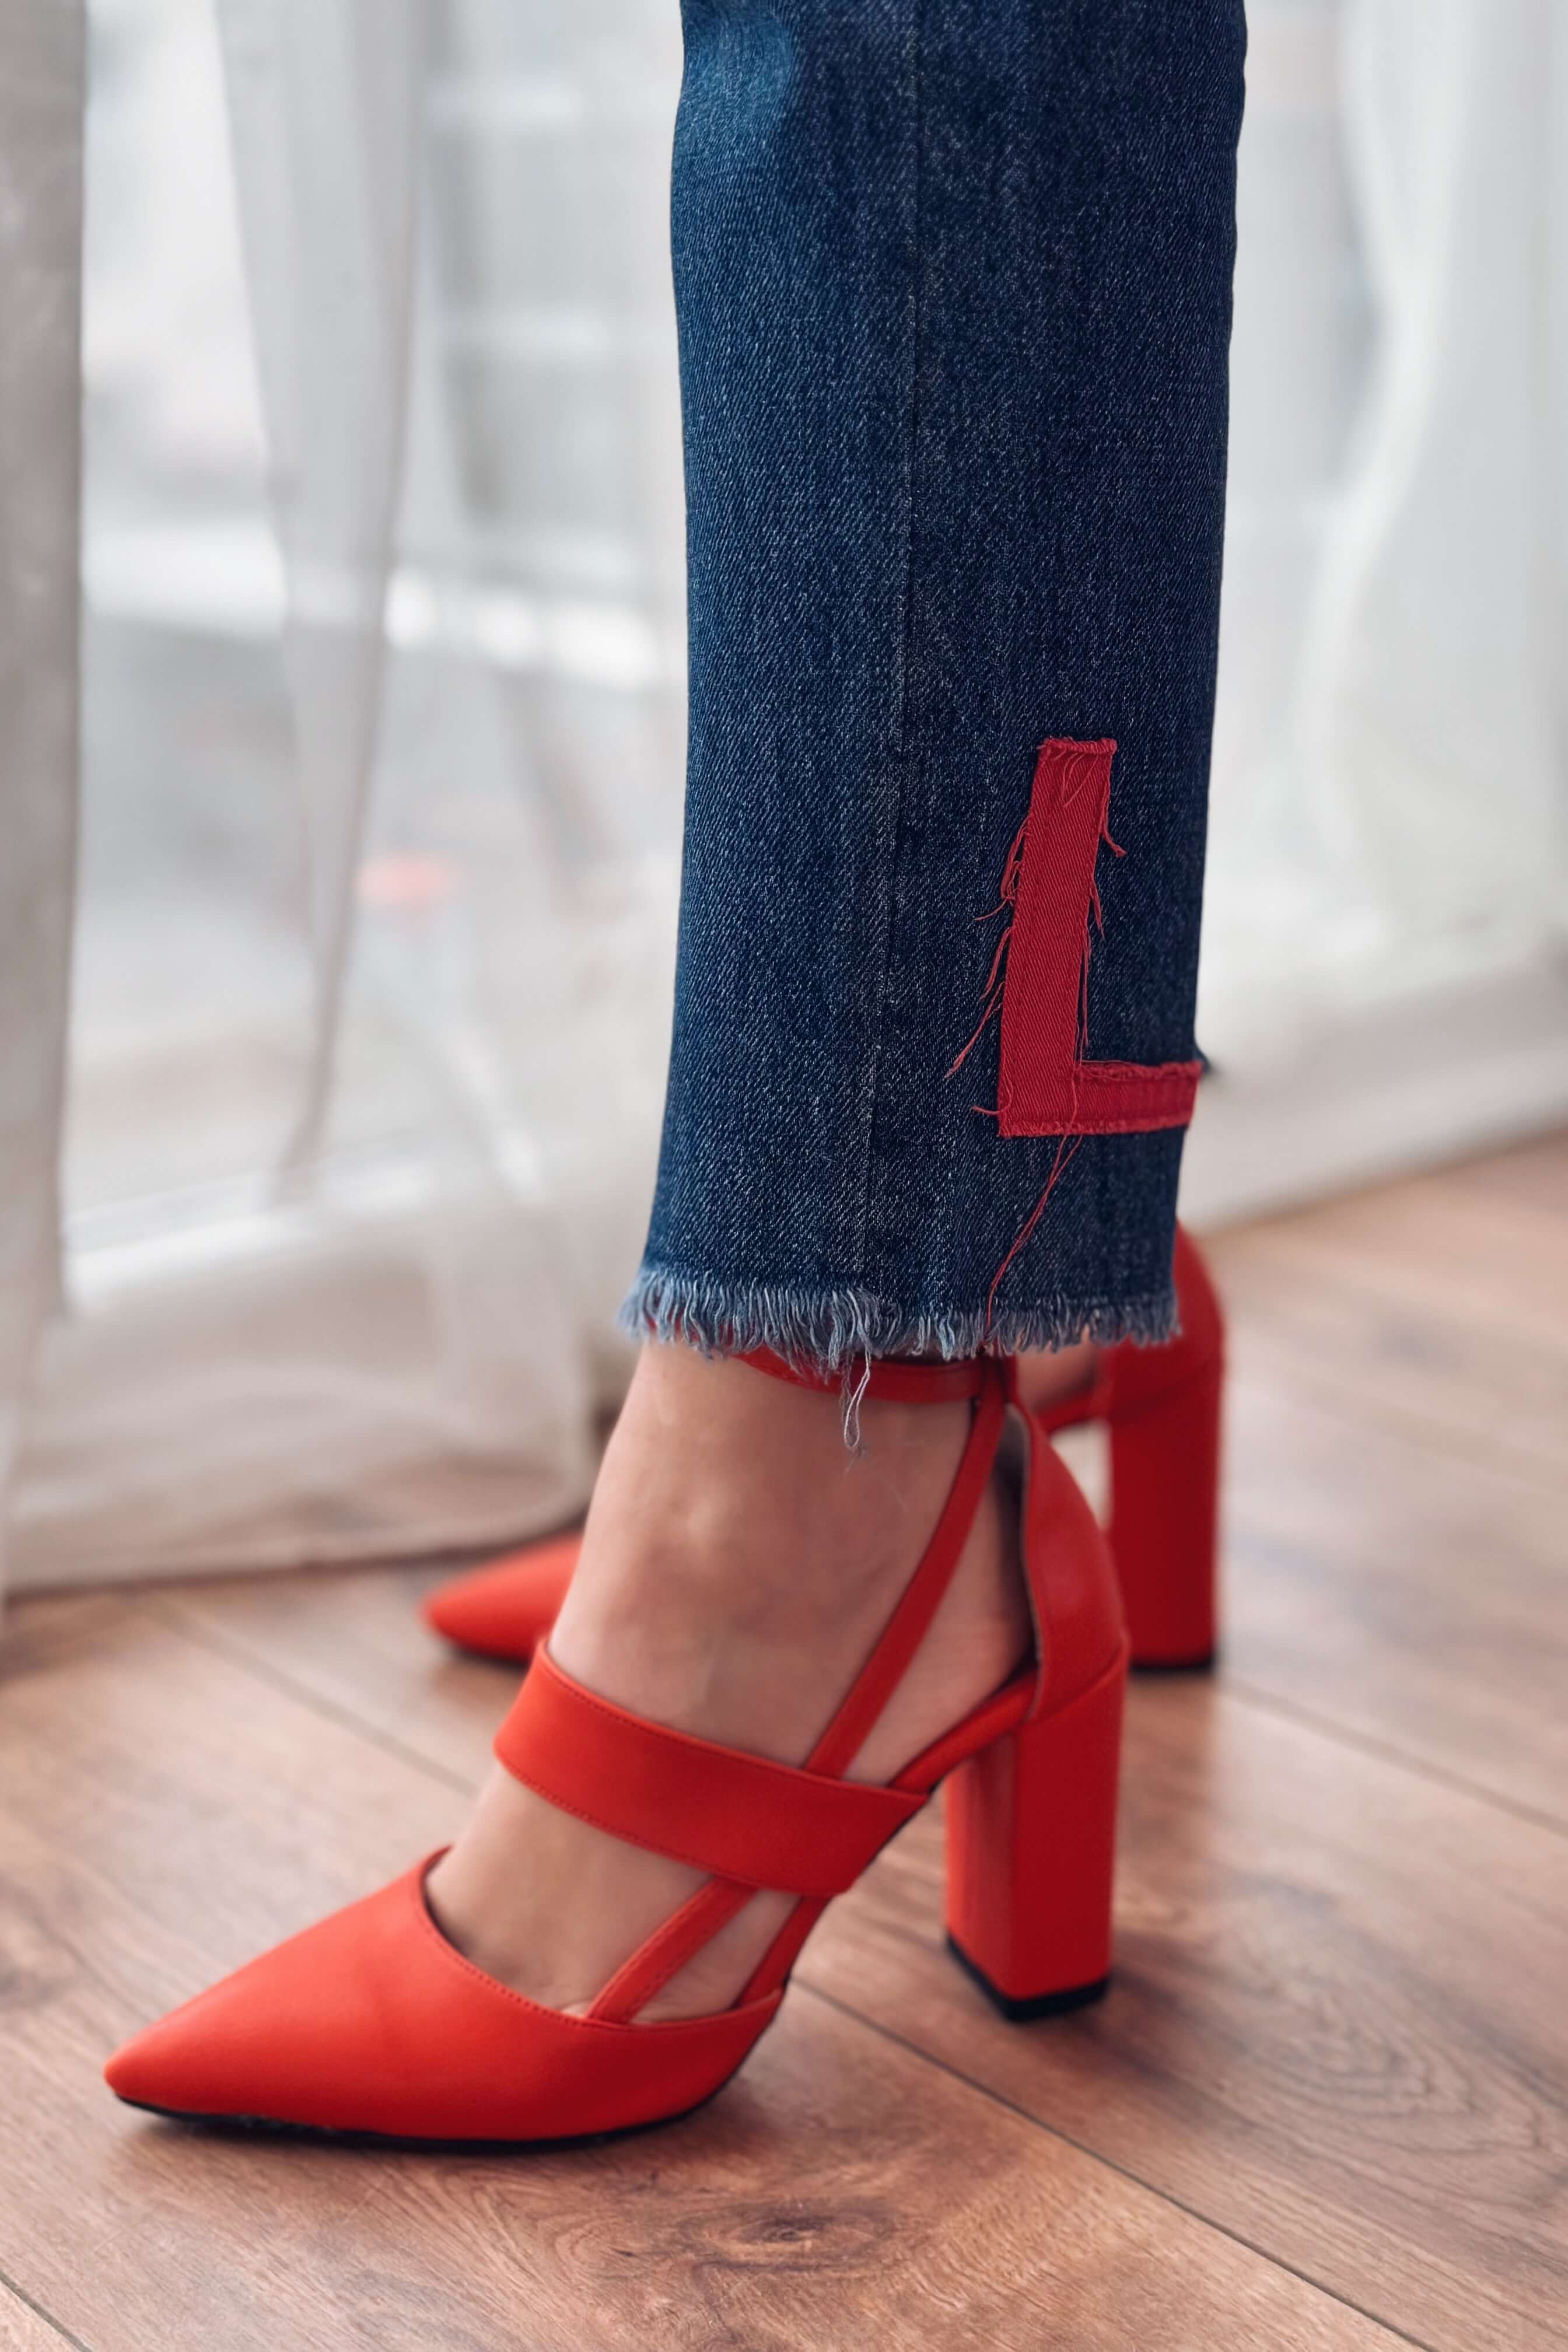 Lucia matte leather high heels woman stiletto red